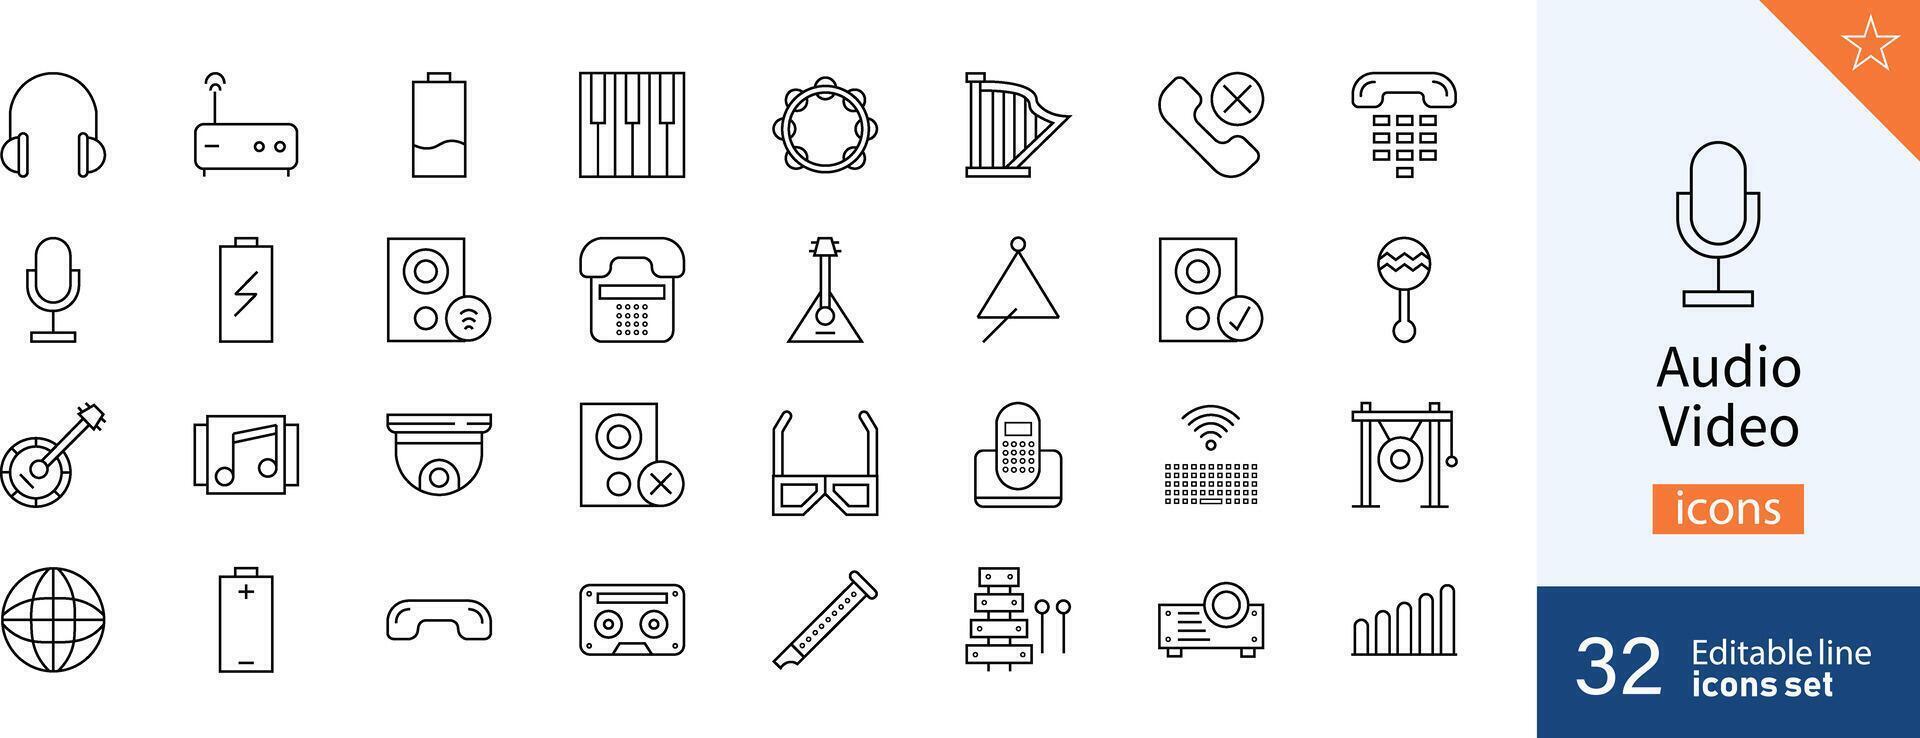 Set of 32 Audio and Video web icons in line style. Audio, video, icon, thin, line, flat. Vector illustration.